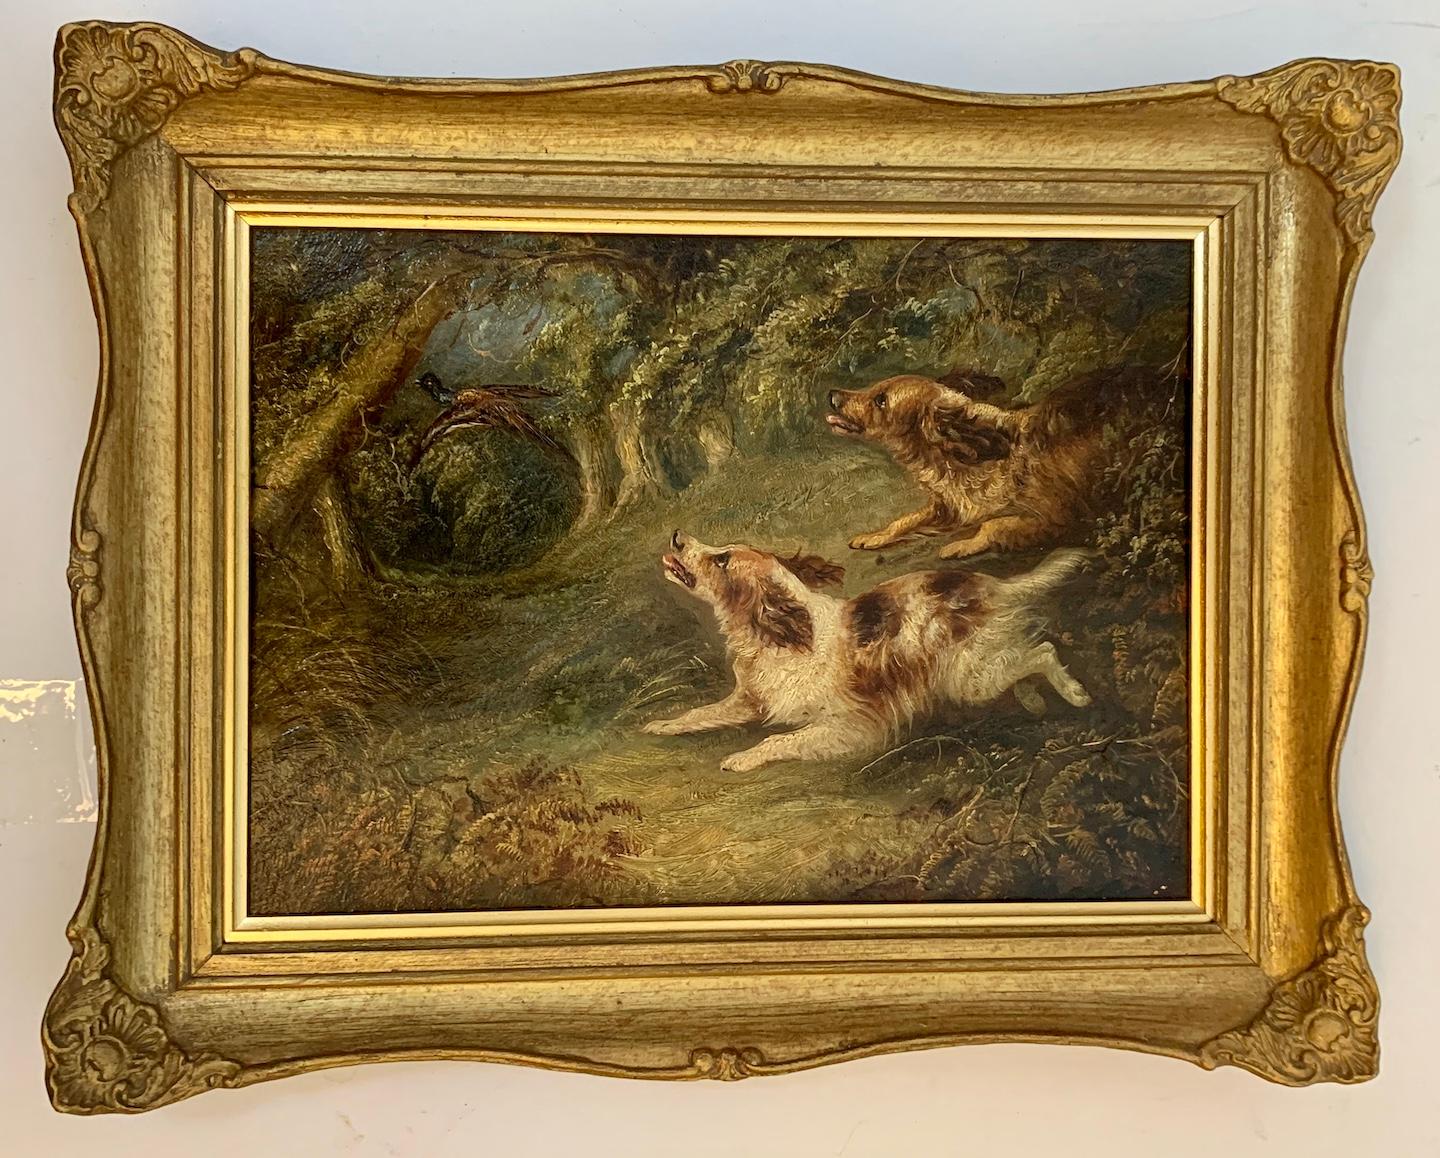 19th century English , two spaniel dogs chasing a Pheasant in a landscape